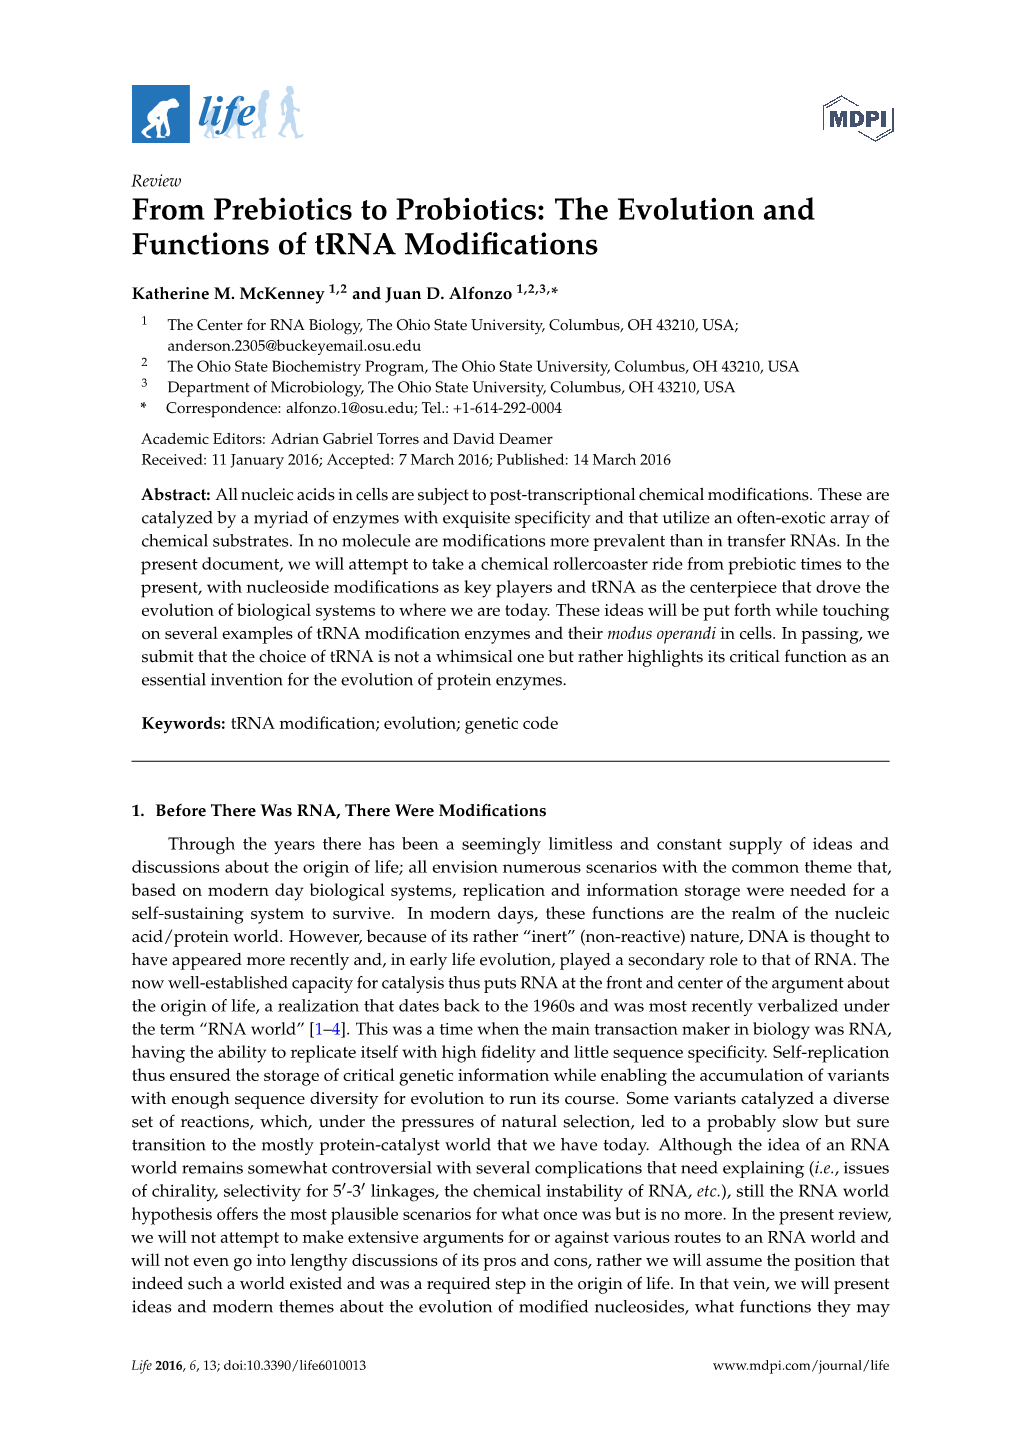 The Evolution and Functions of Trna Modifications